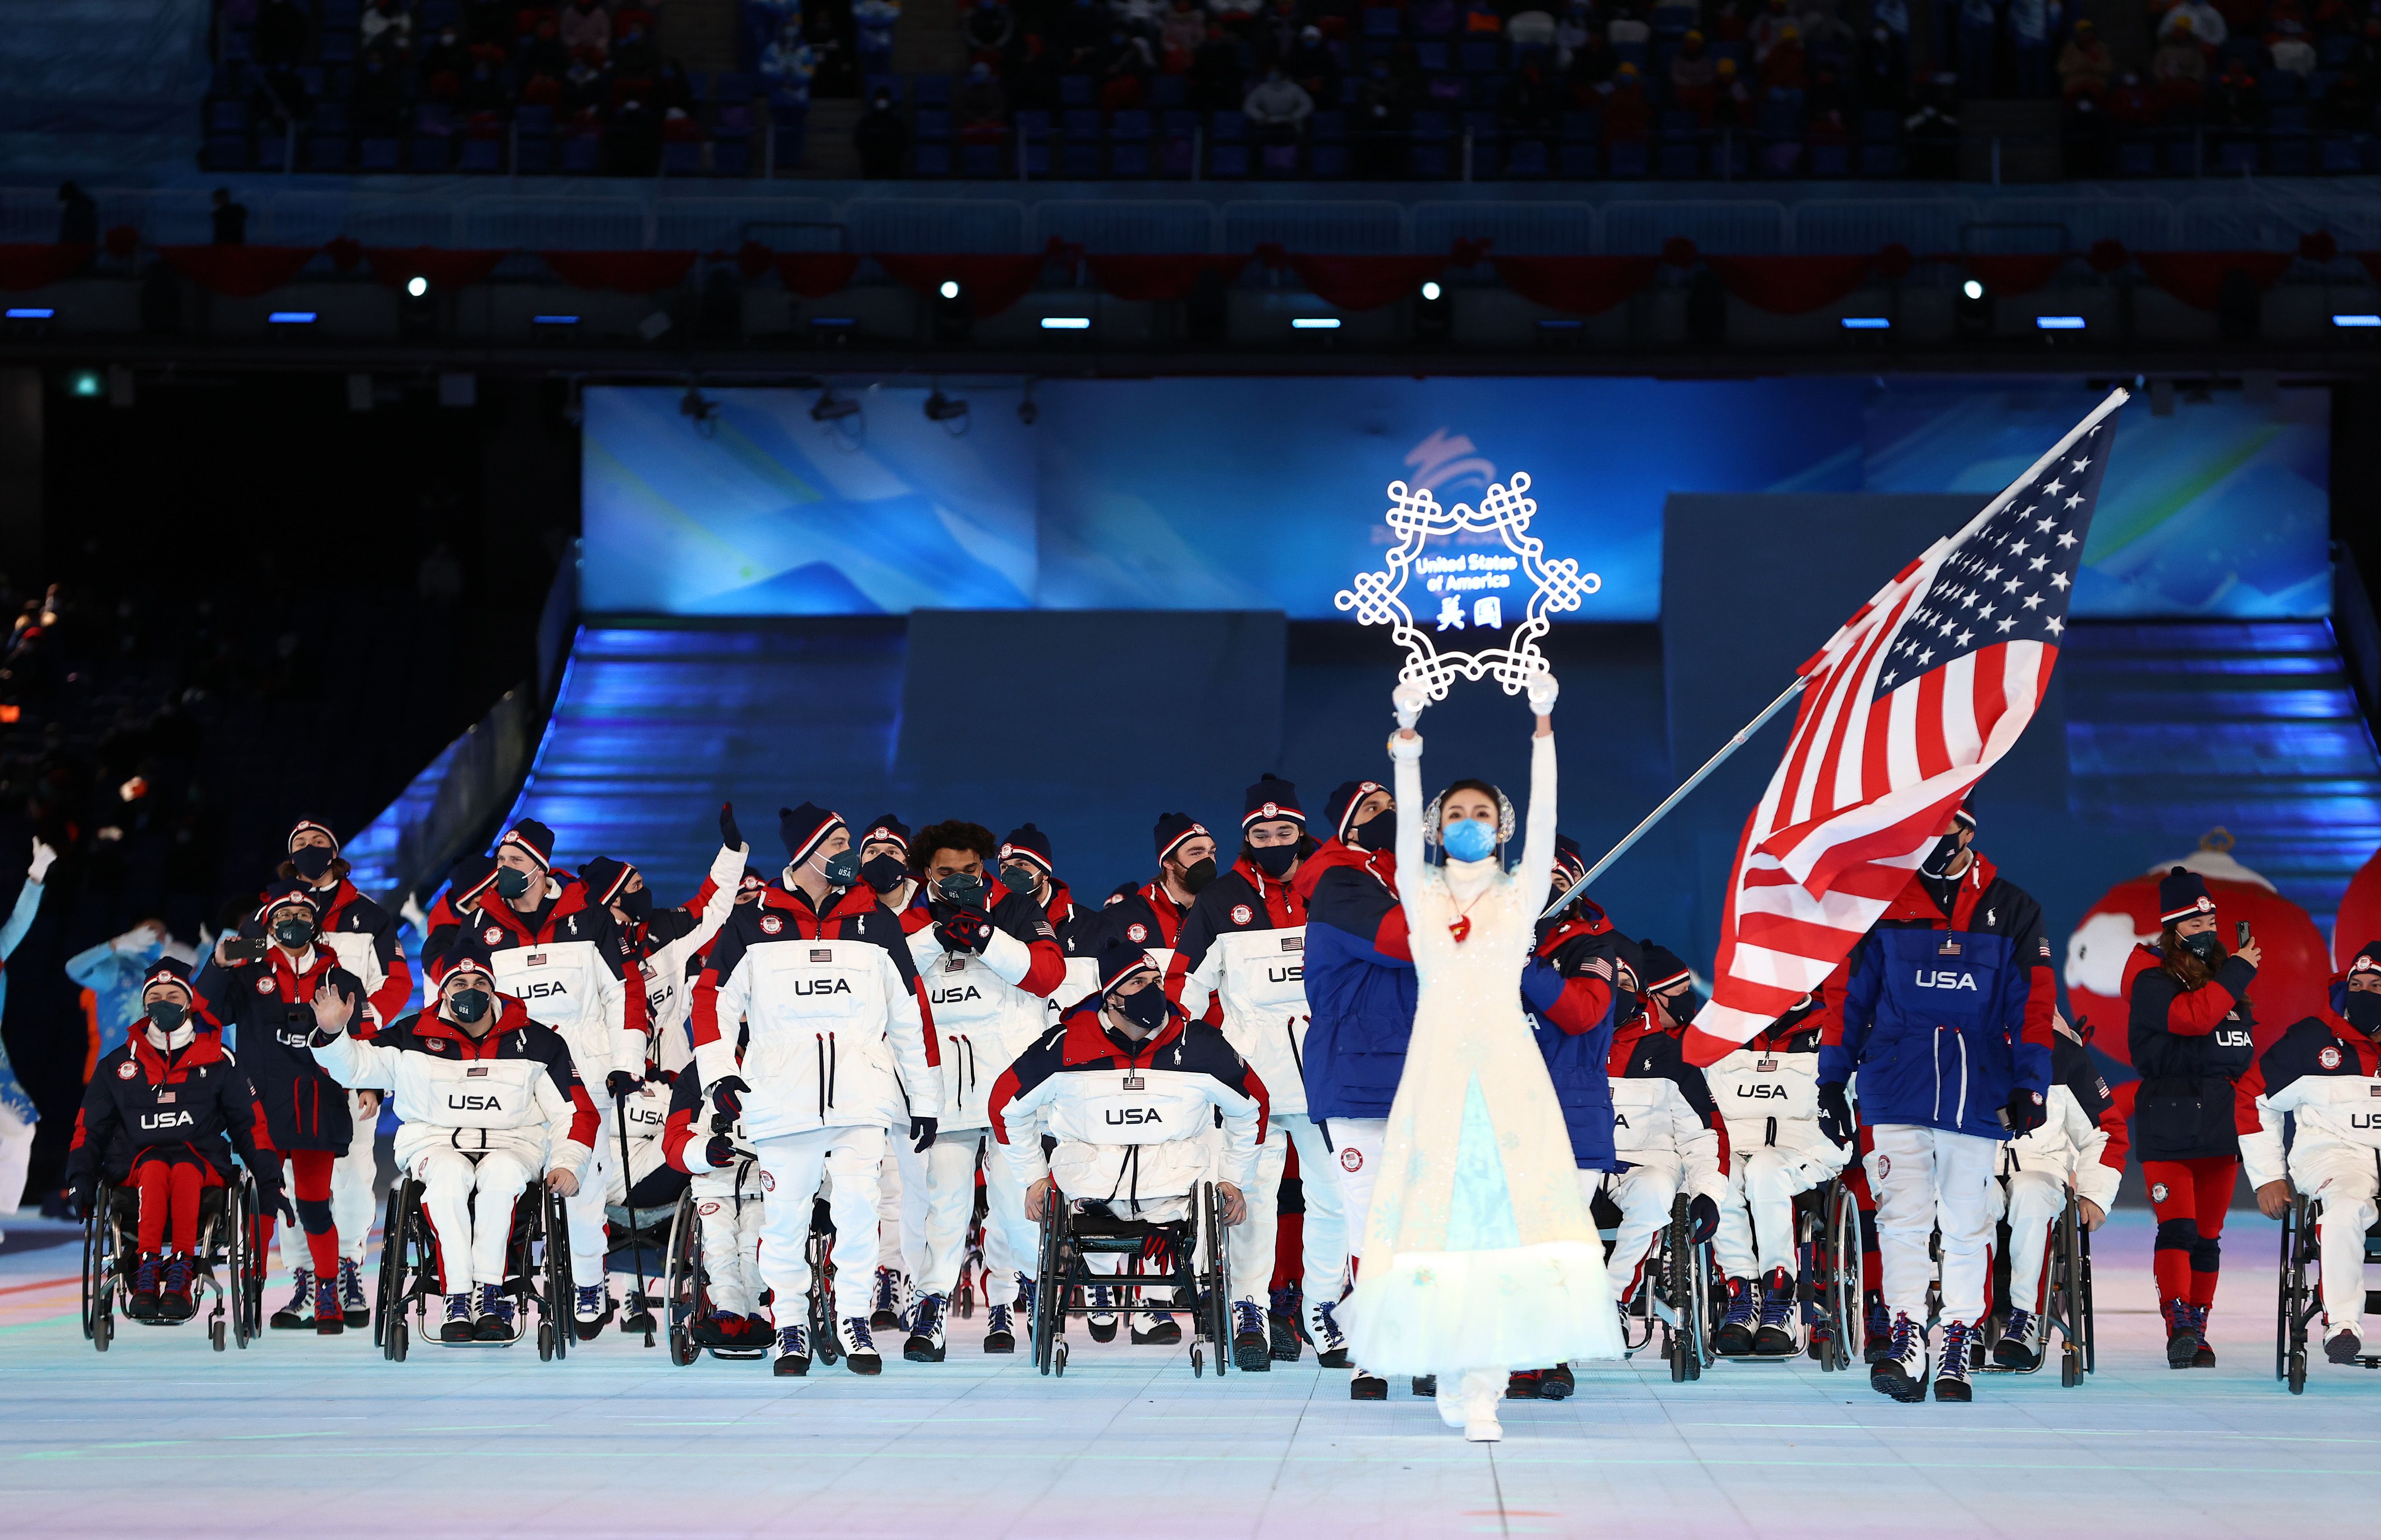  Flag bearers Tyler Carter and Danelle Umstead of Team United States lead their team out during the Opening Ceremony.